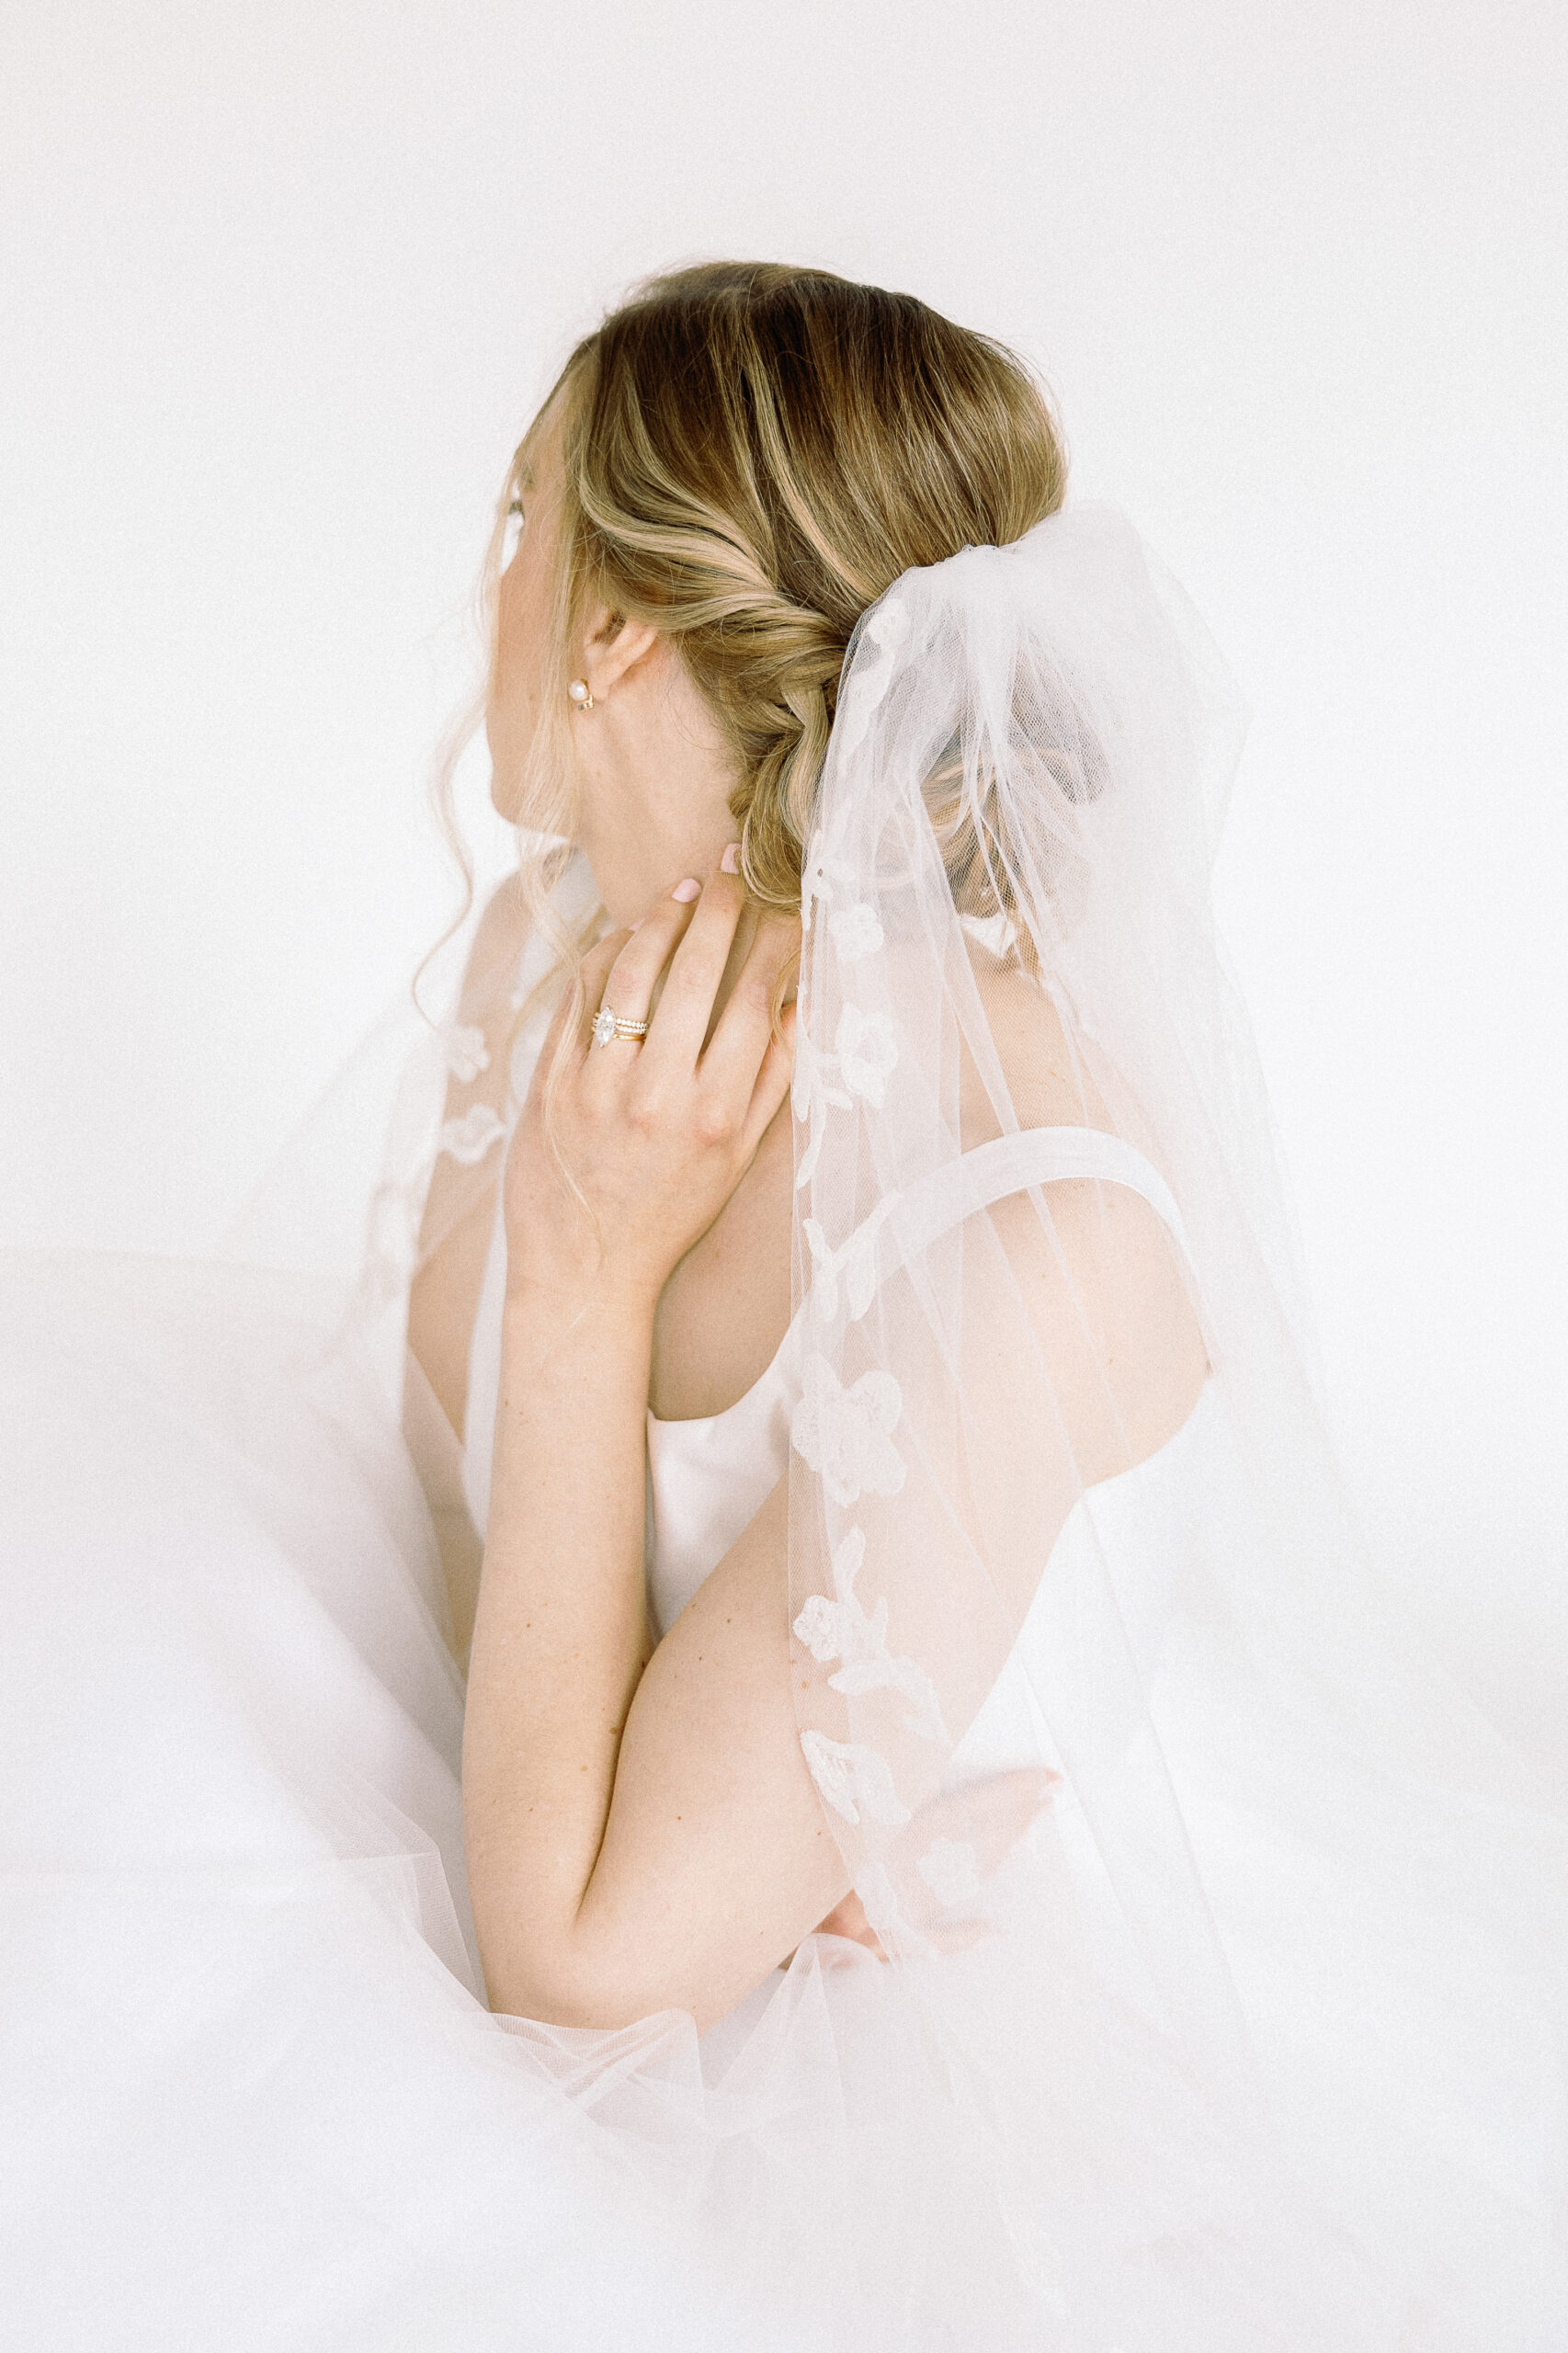 sarah kolis couture gown bride ashley in custom cathedral veil